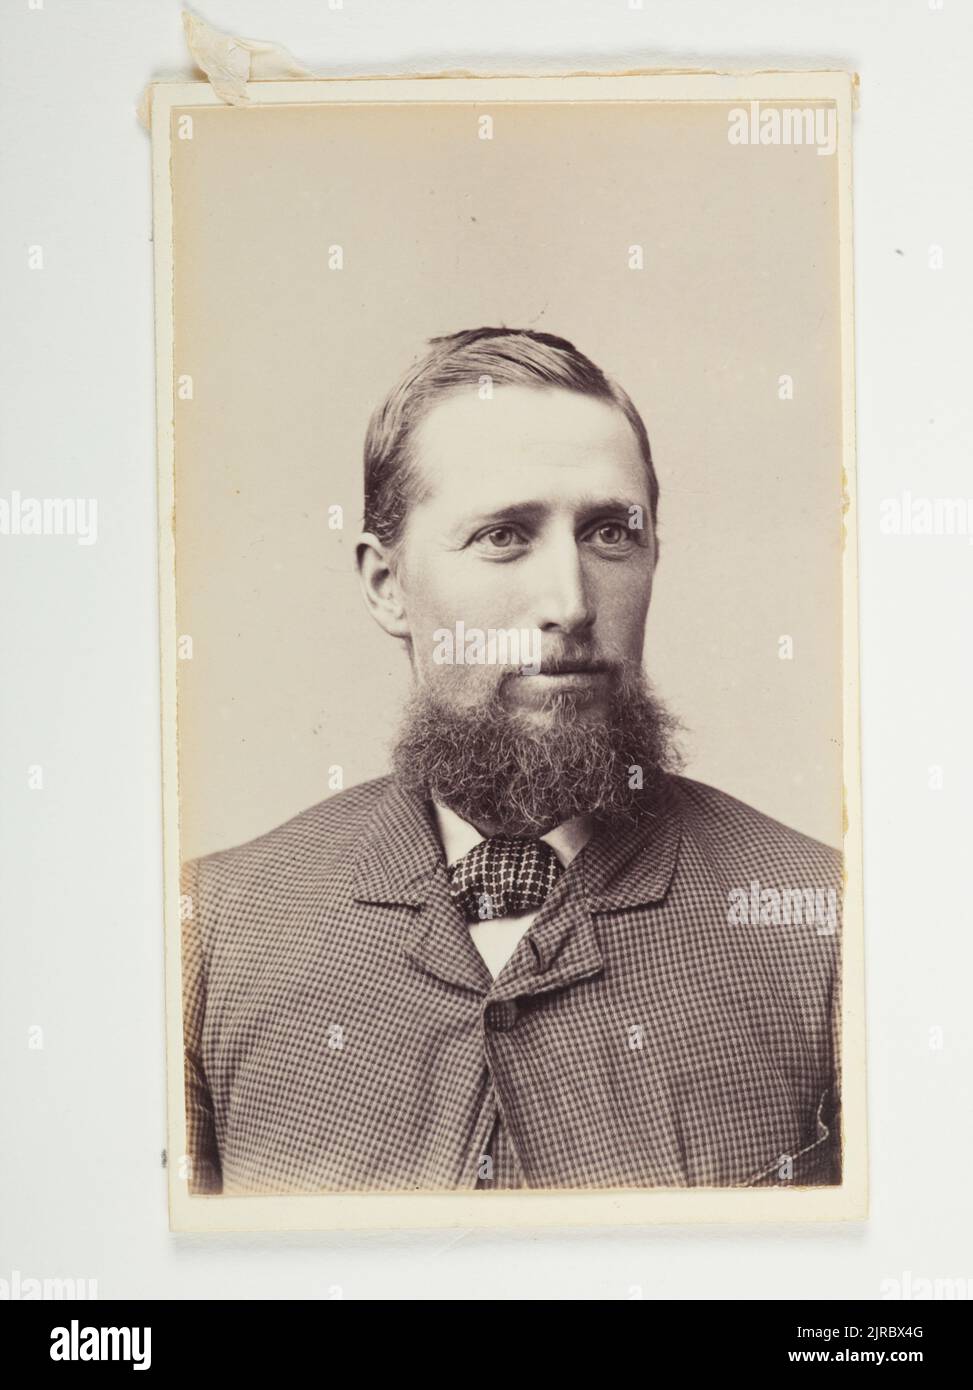 Portrait of a man, 1880s, New Zealand, maker unknown. Stock Photo